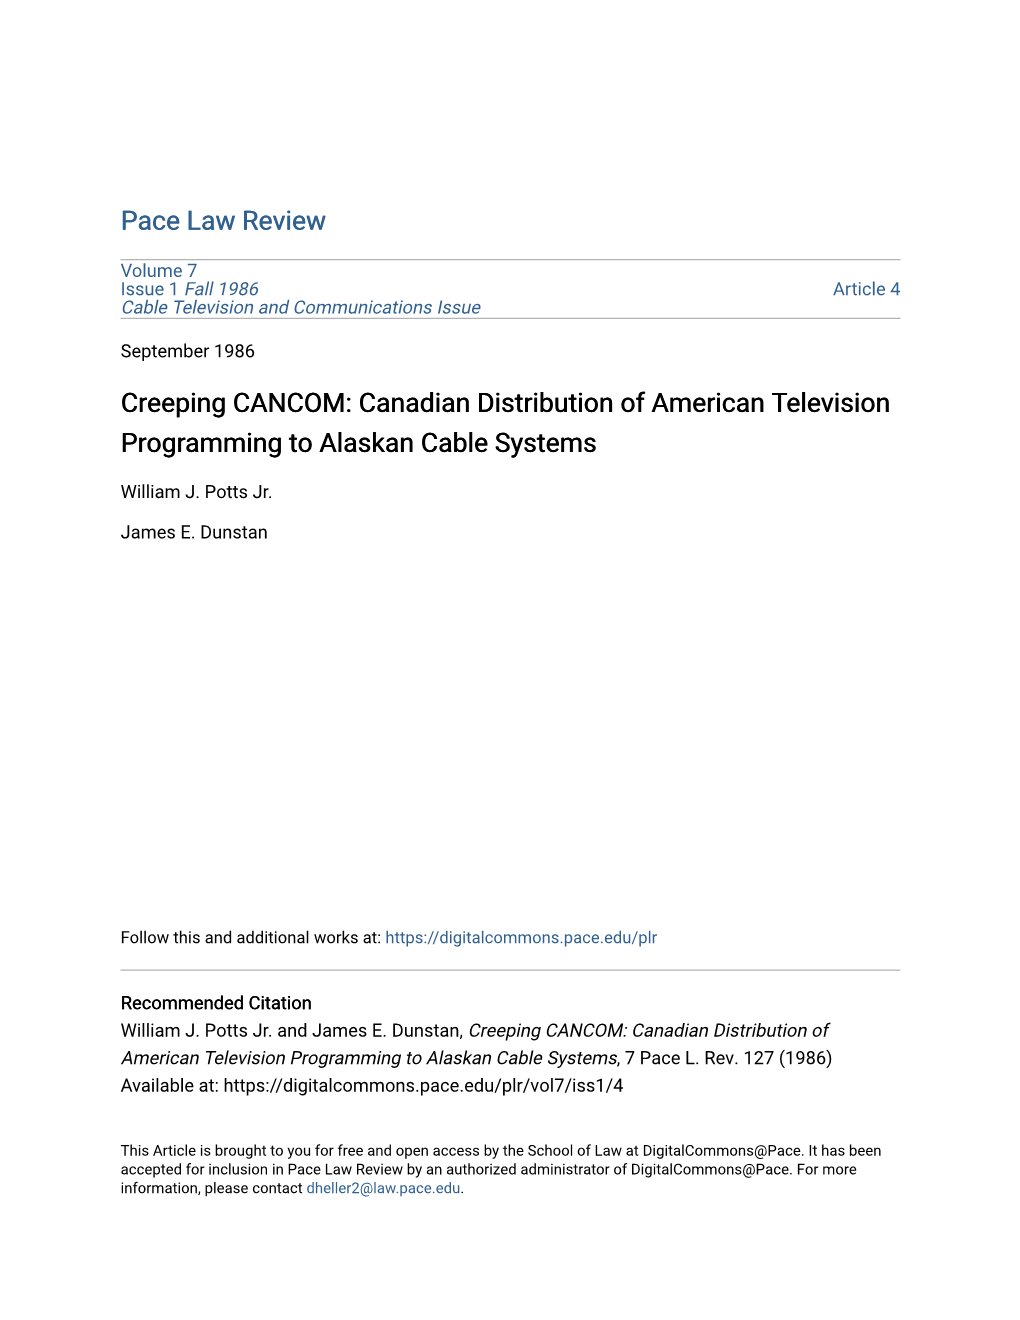 Creeping CANCOM: Canadian Distribution of American Television Programming to Alaskan Cable Systems